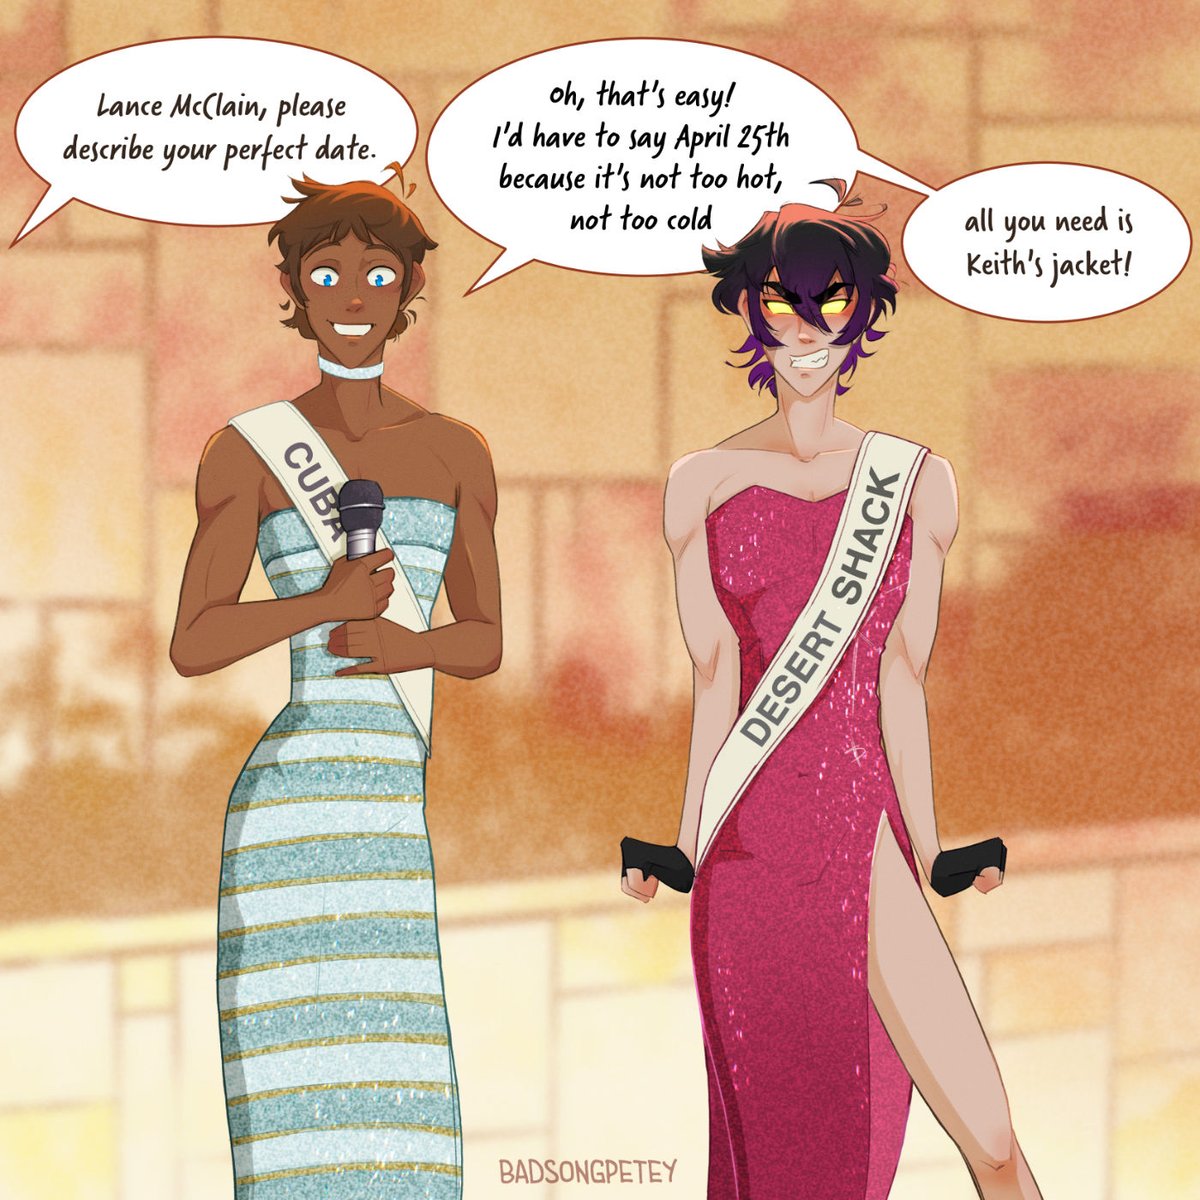 Redraw of my Perfect Date art from 2 years ago - a little late, sigh. I'm rly pleased with the sequined pageant gowns (so is Lance). Also happy belated @caeseria_k !
#klance #Voltron #misscongeniality